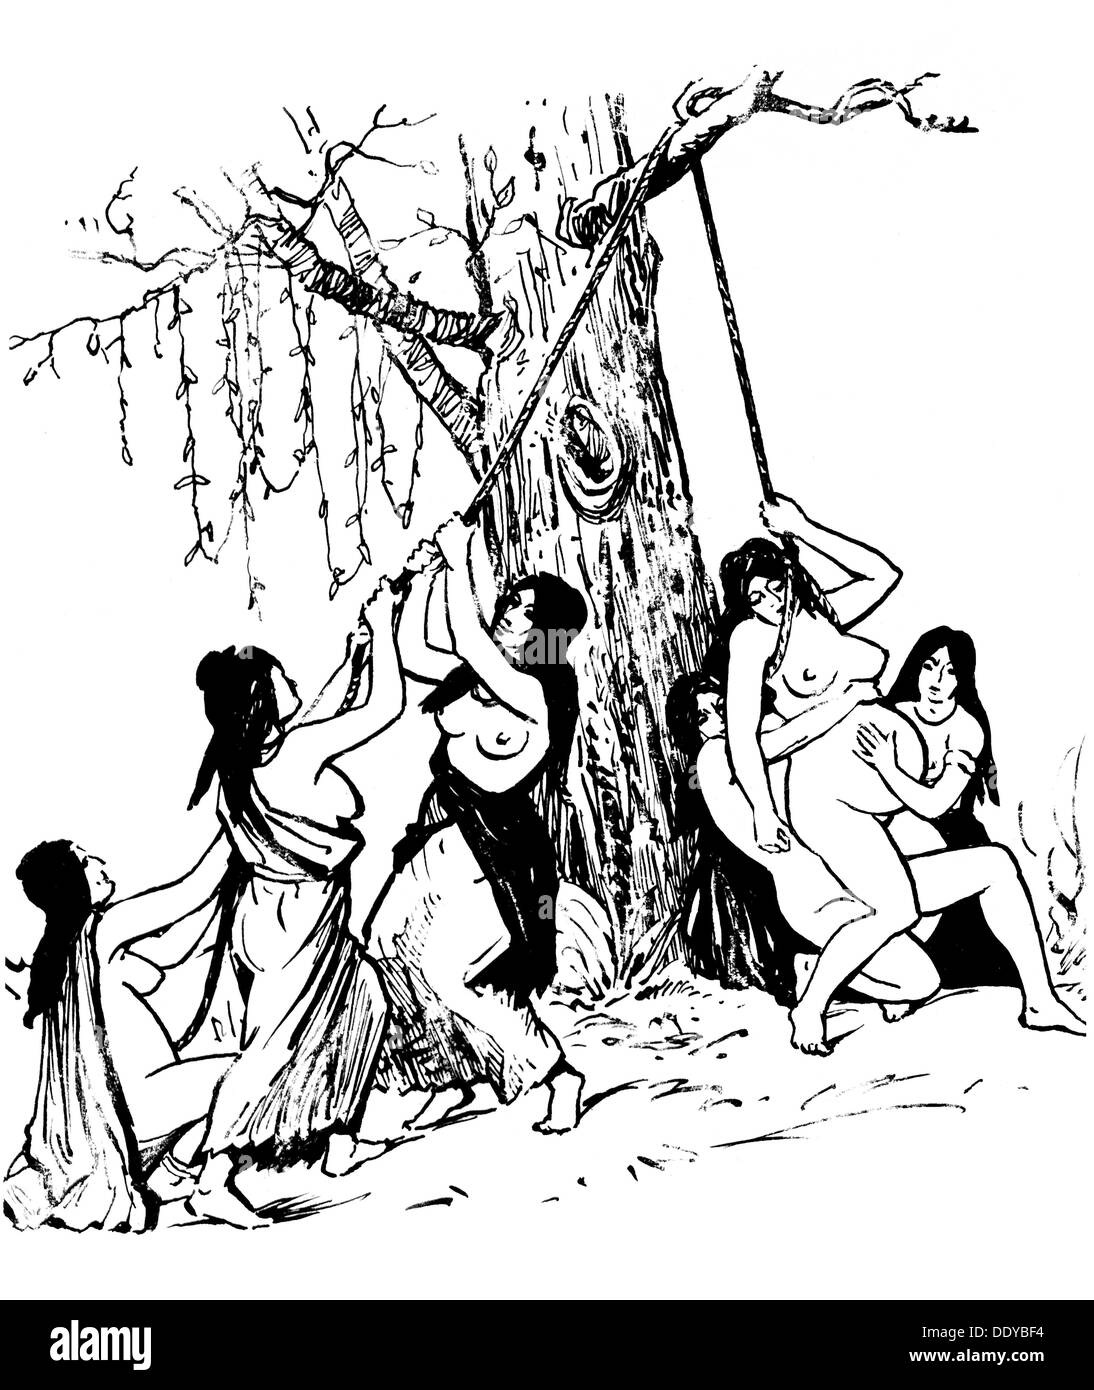 medicine,birth / gynecology,Red Indian women holding pregnant woman upright with a sling to facilitate childbearing,drawing,graphic,graphics,North America,Red Indian,Indian,Red Indians,Indians,half length,standing,tree,trees,rope,ropes,pull,pulling,obstetrics,birthing,bear,give birth,pregnant woman,pregnant women,holding,hold,delivery,childbearing,childbirth,preparation,preparations,facilitation,help,helping,assist,assinting,medicine,medicines,gynecology,gynaecology,sling,slings,birth,births,facilitate,facilitating,,Additional-Rights-Clearences-Not Available Stock Photo